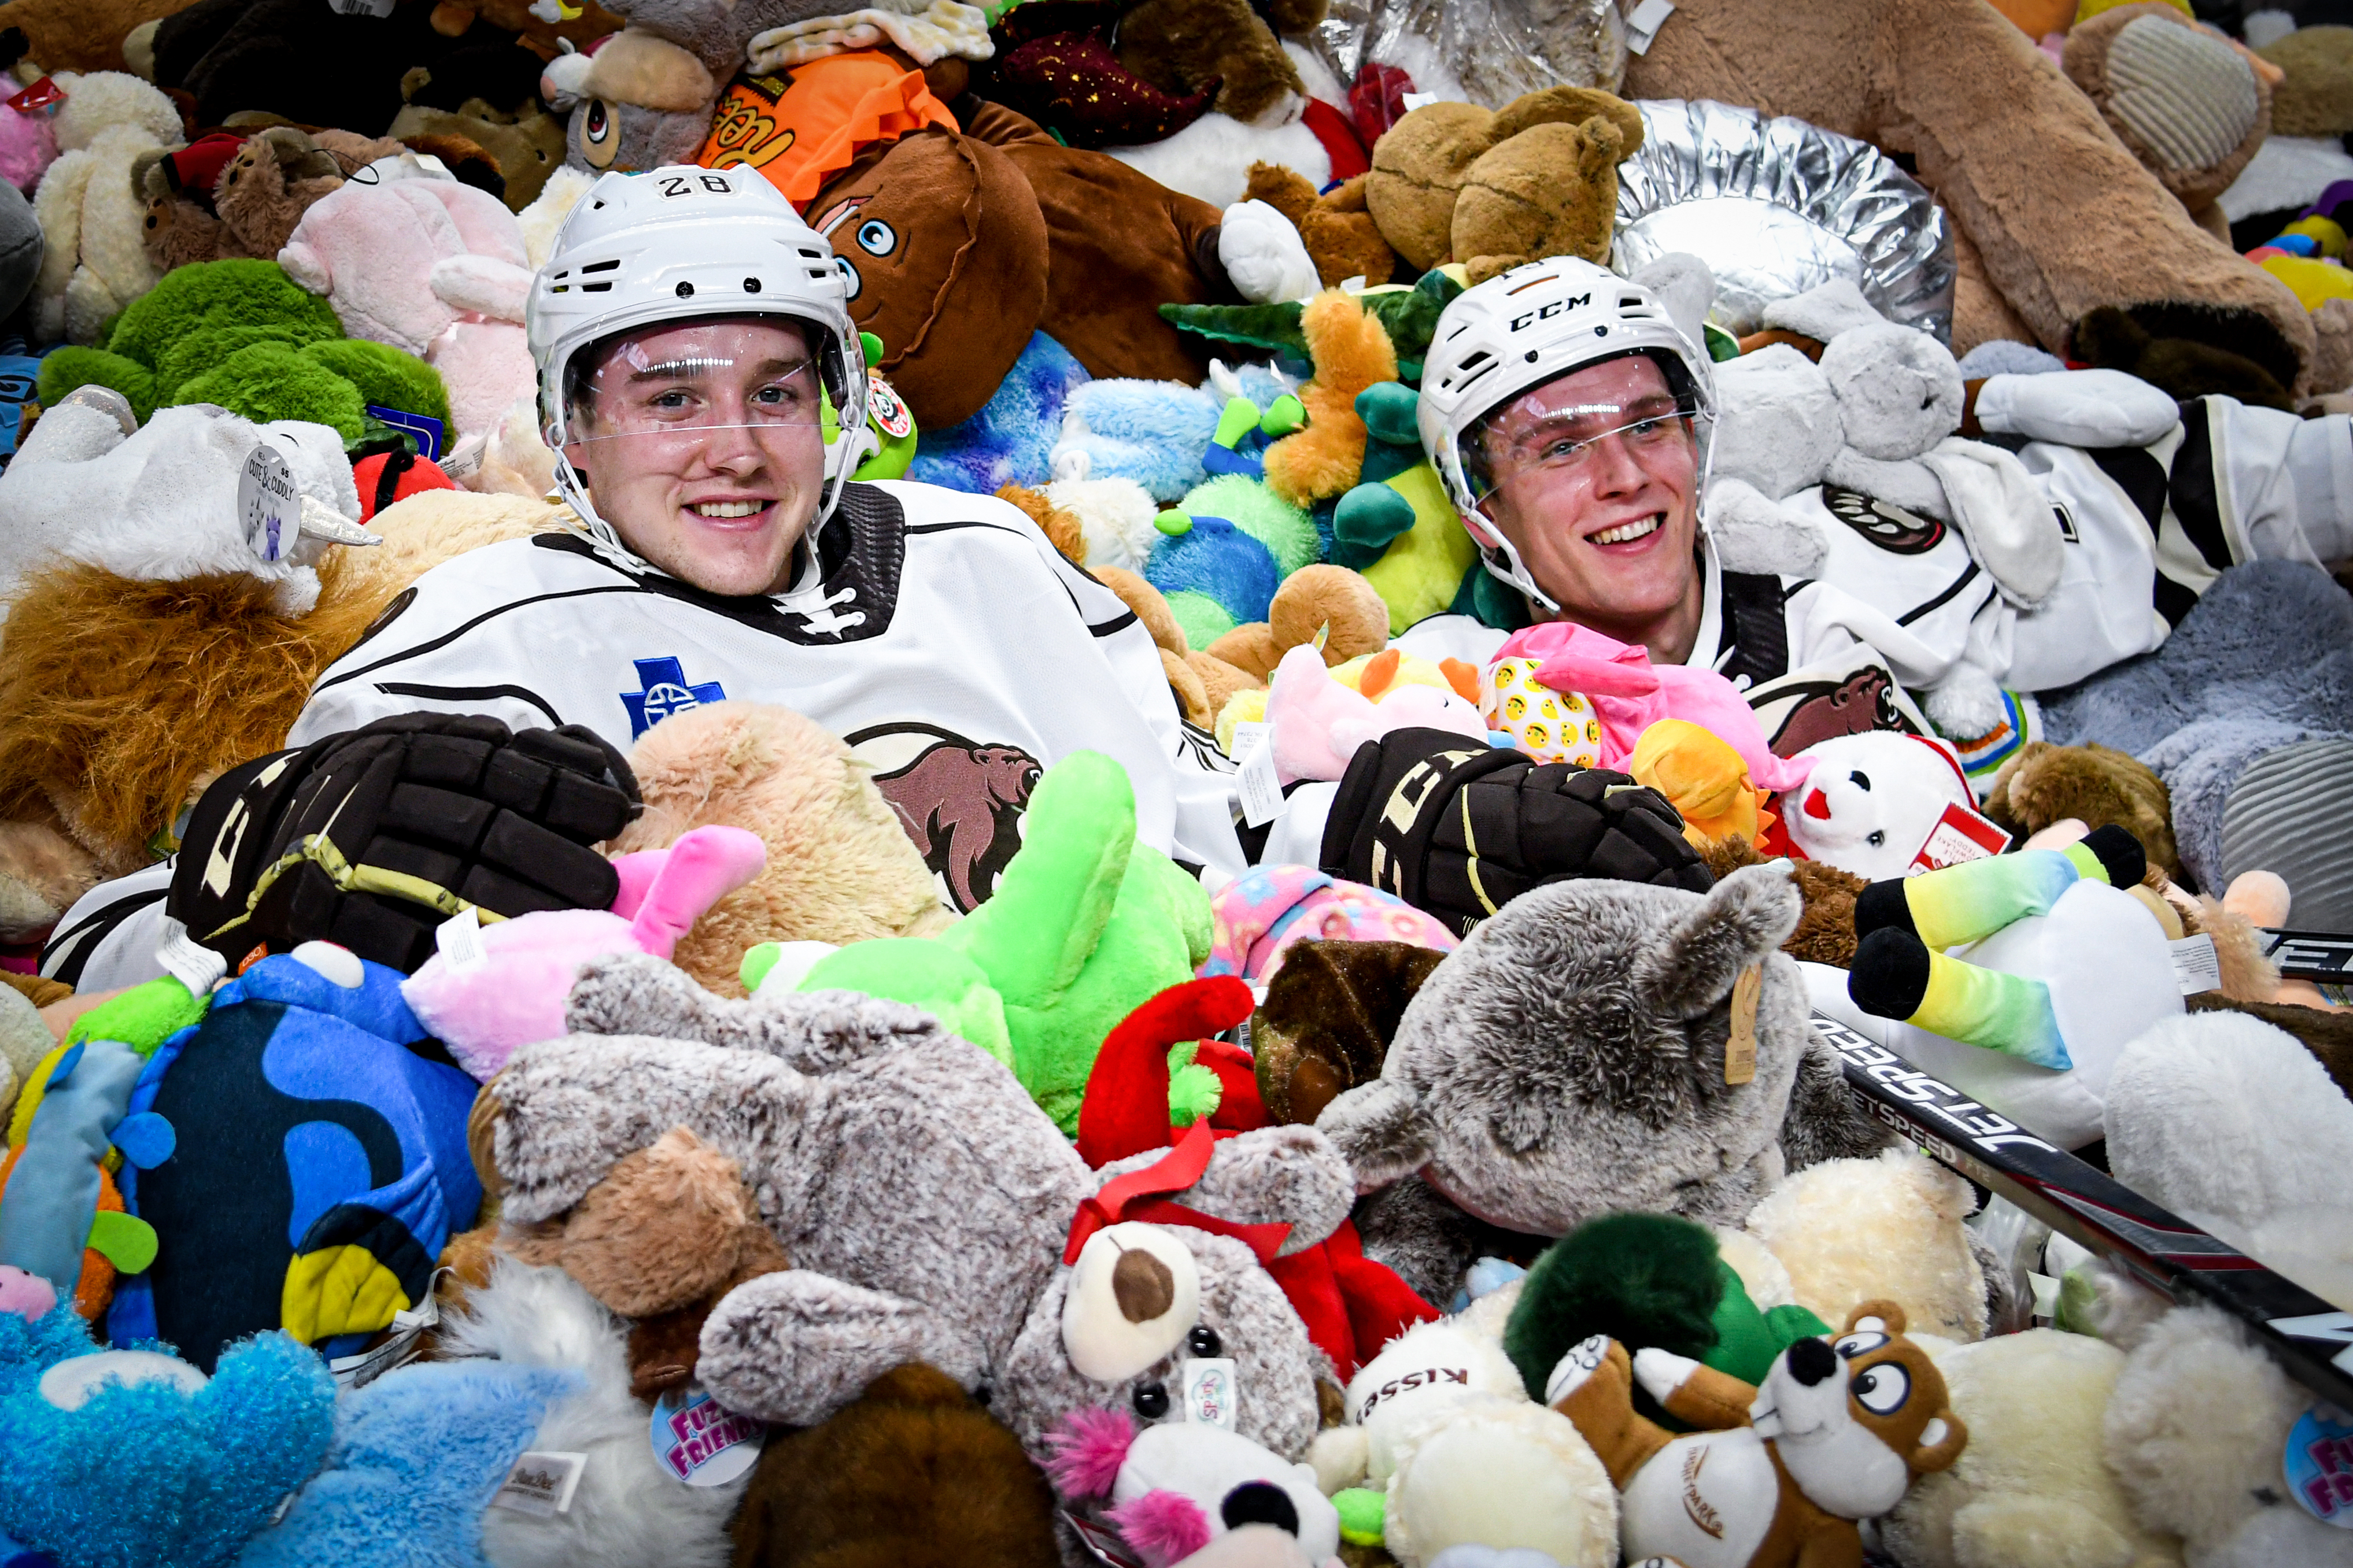 Annual Teddy Bear Toss breaks world record at AHL game in Hershey, Pa.